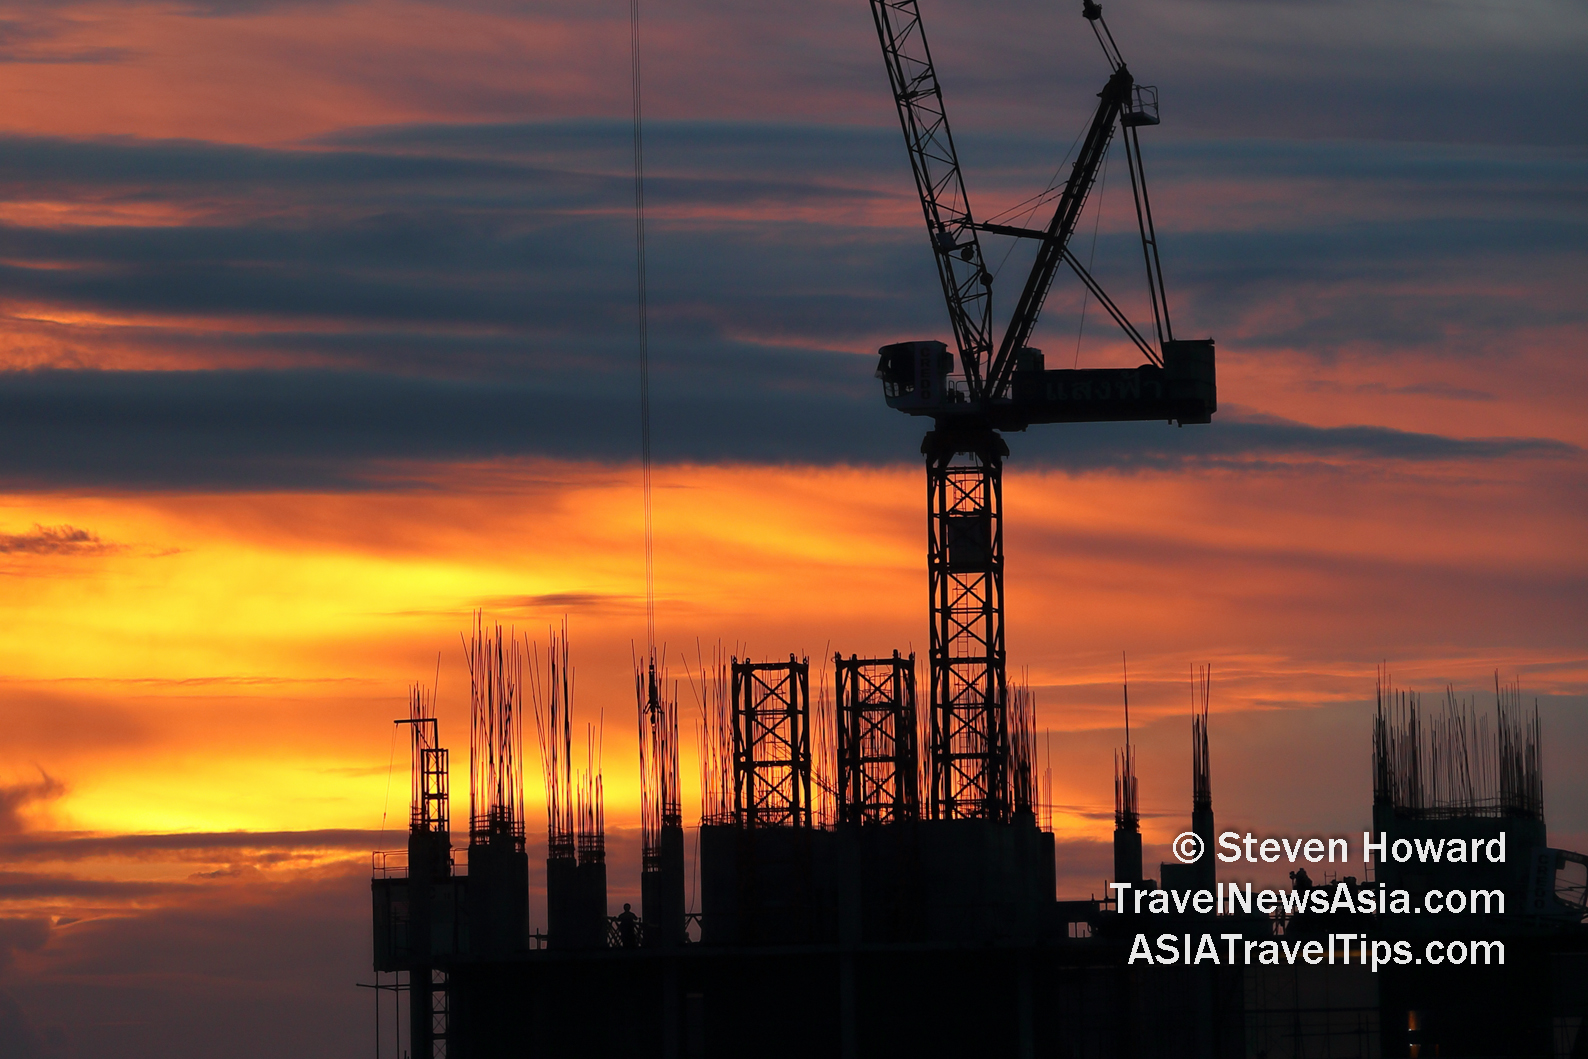 Construction and a sunset in Bangkok, Thailand on 15 September 2021. Picture by Steven Howard of TravelNewsAsia.com Click to enlarge.